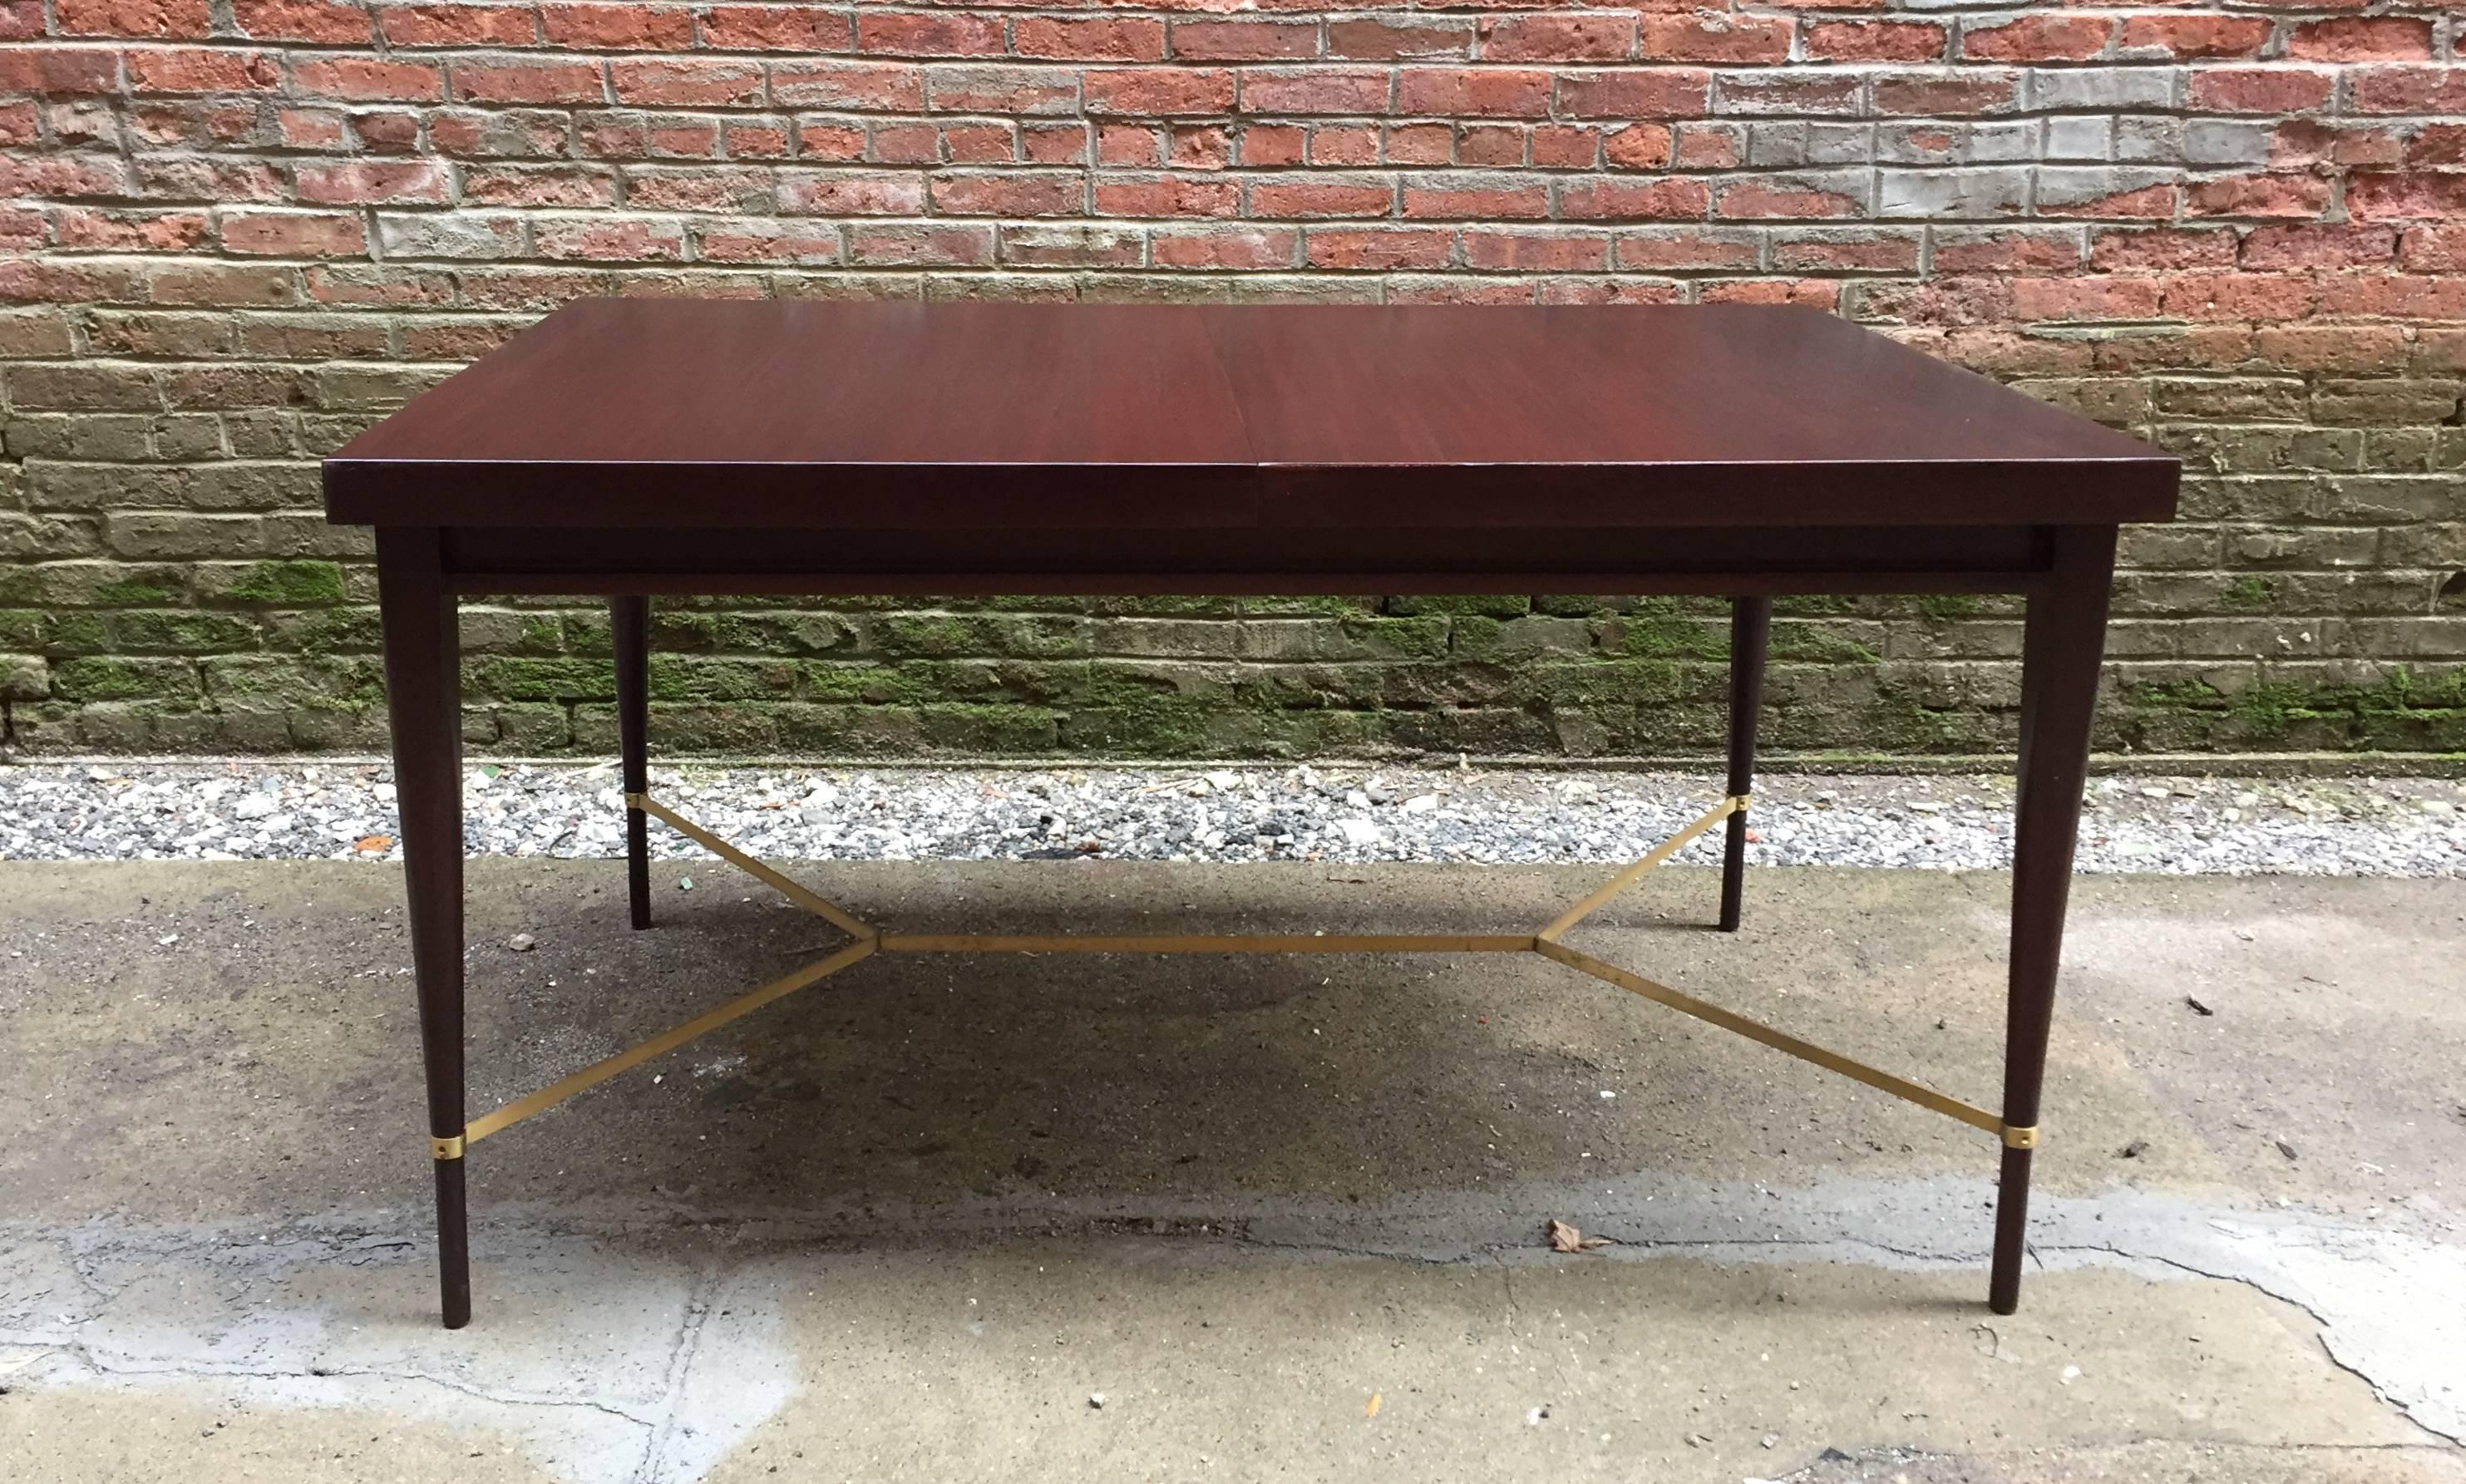 Mahogany top and tapered legs with brass stretcher base. Comes with one leaf. Wonderful, compact modern design by Paul McCobb for Calvin Group, circa 1950-1960. Old refinish that is in very good condition.

The table measures 54" closed